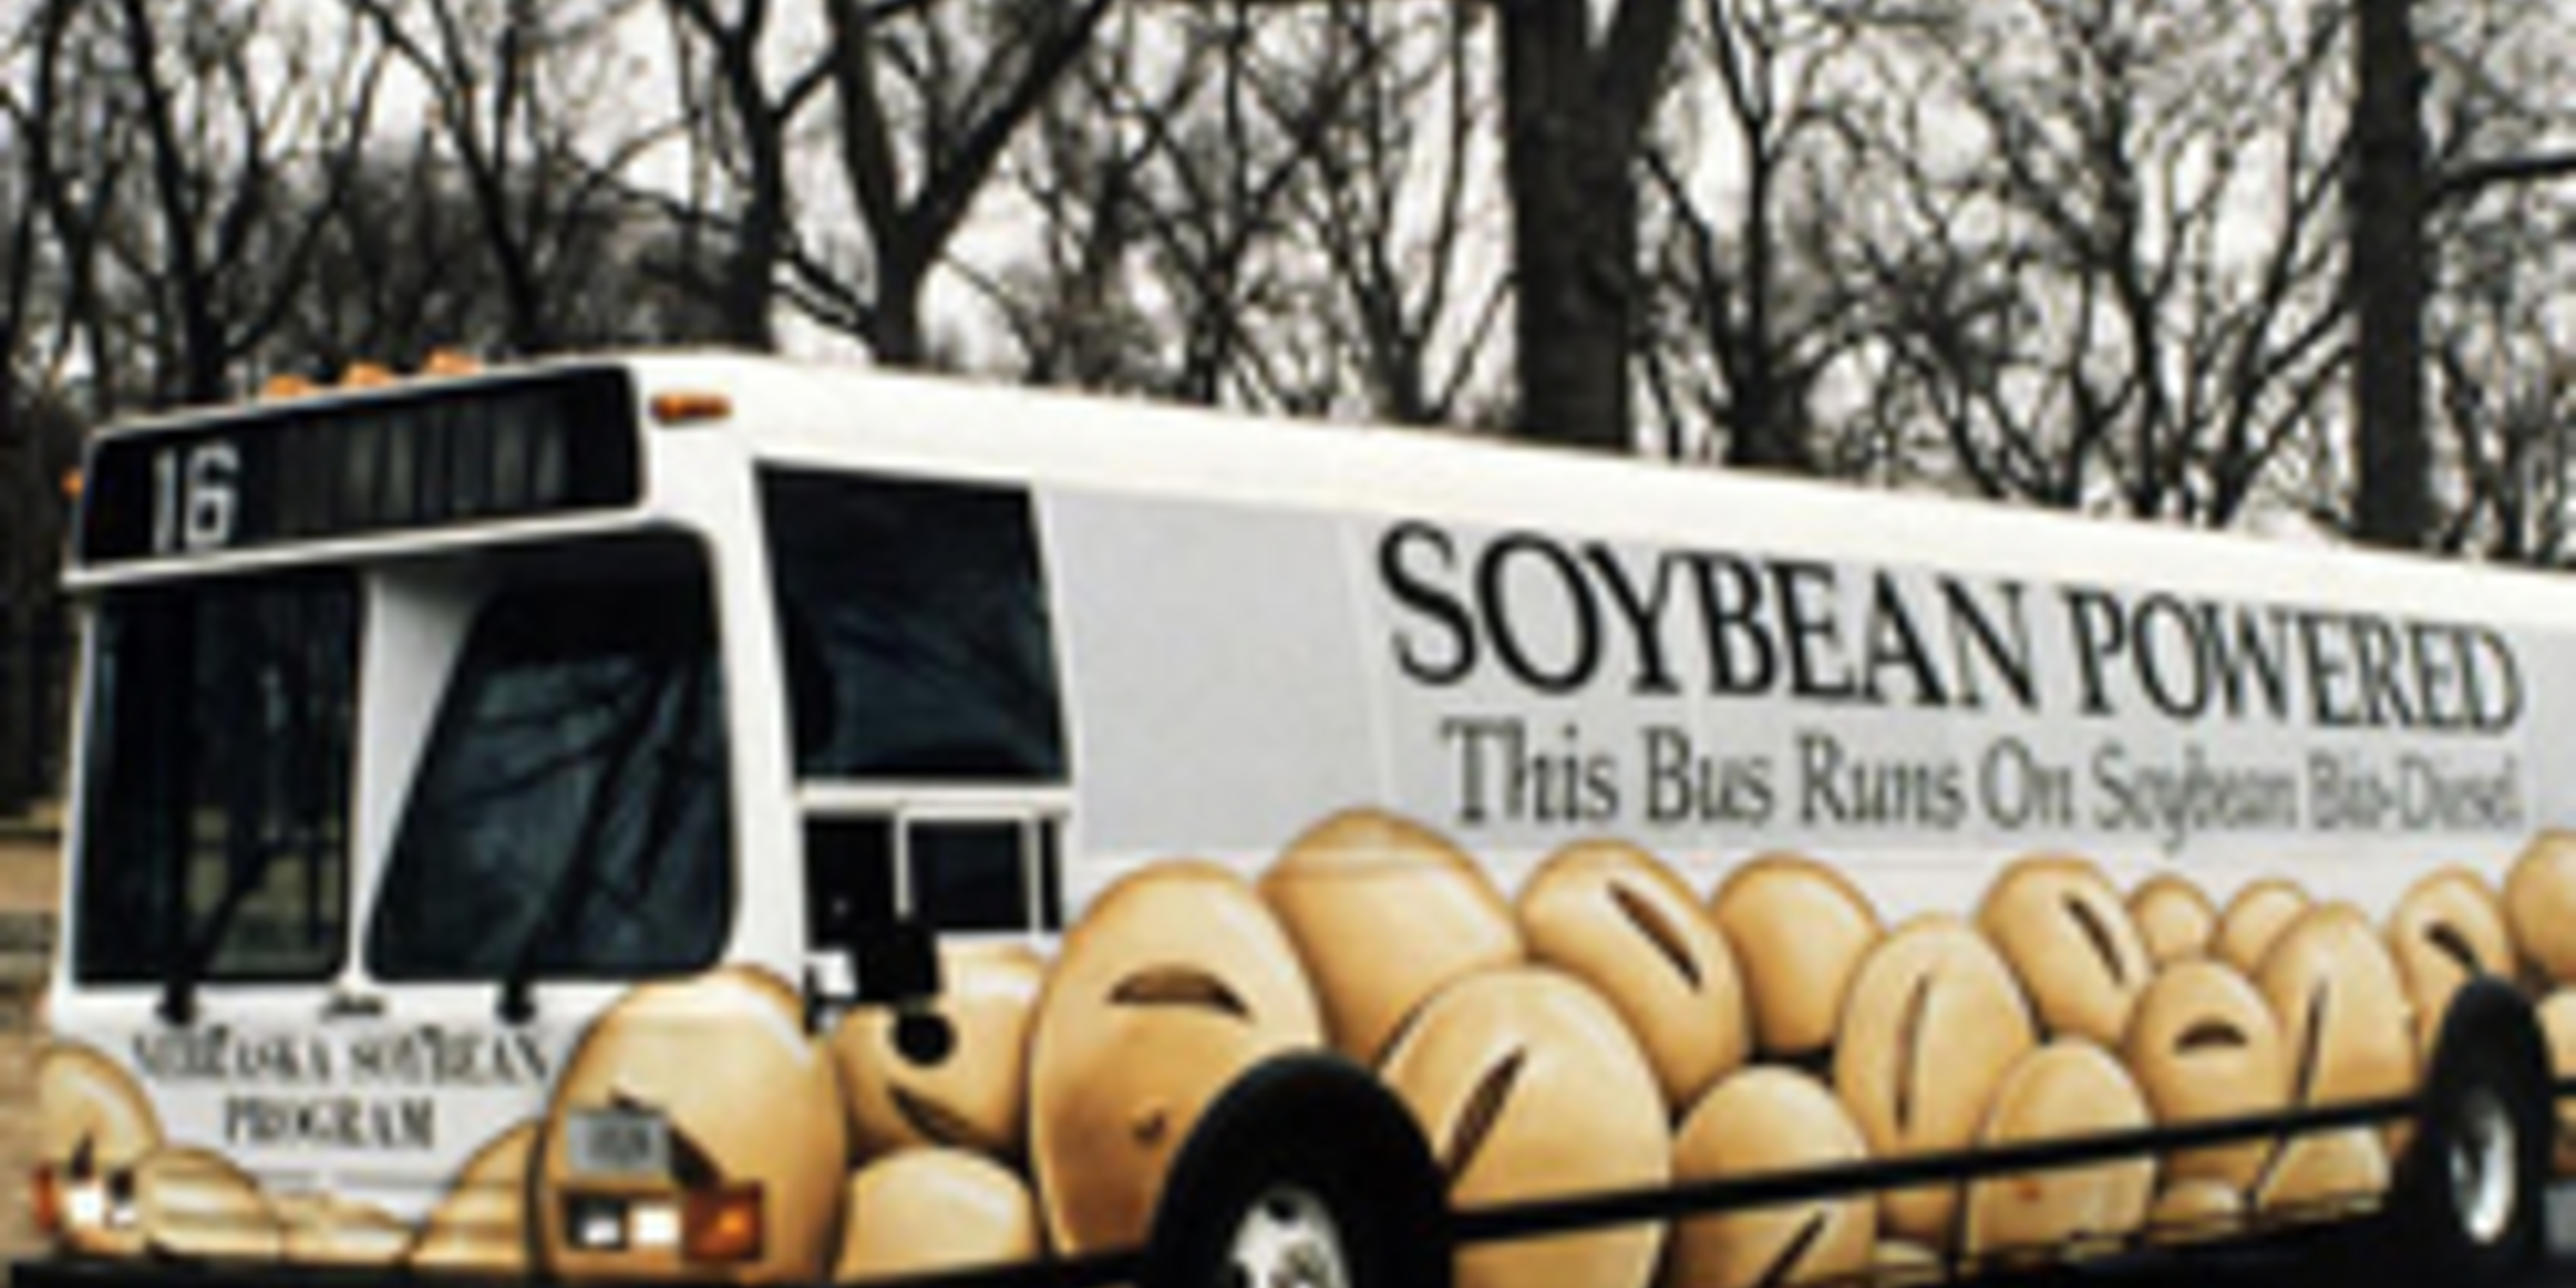 bus with sign on side reading Soybean Powered, This bus runs on soybean bio-diesel